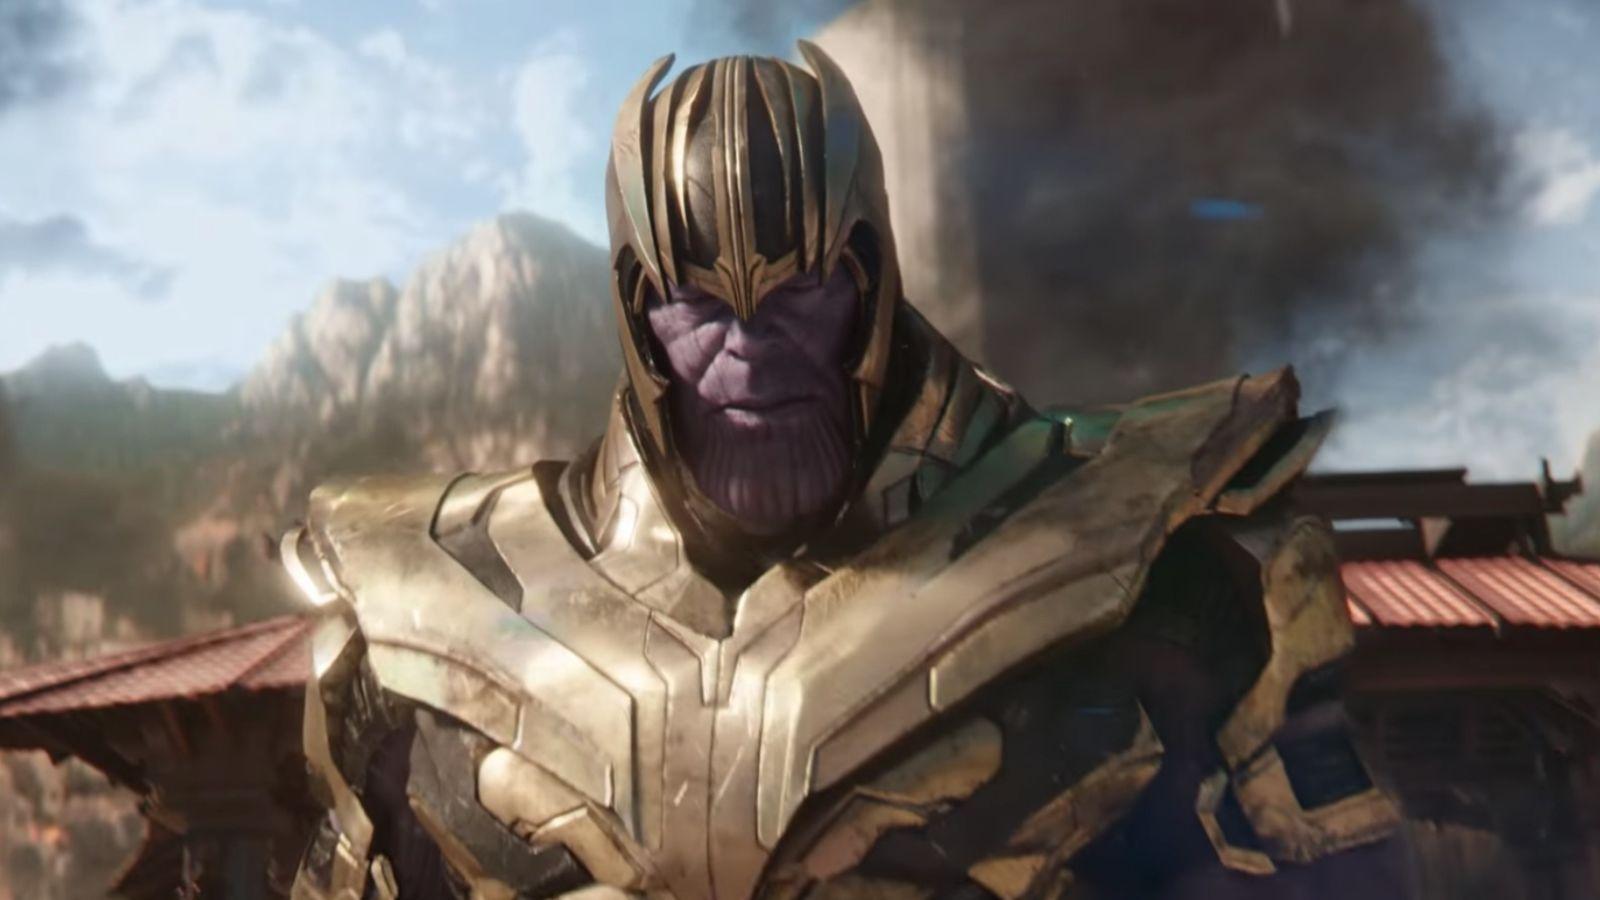 Did Thanos have better options than the snap? An ethics professor